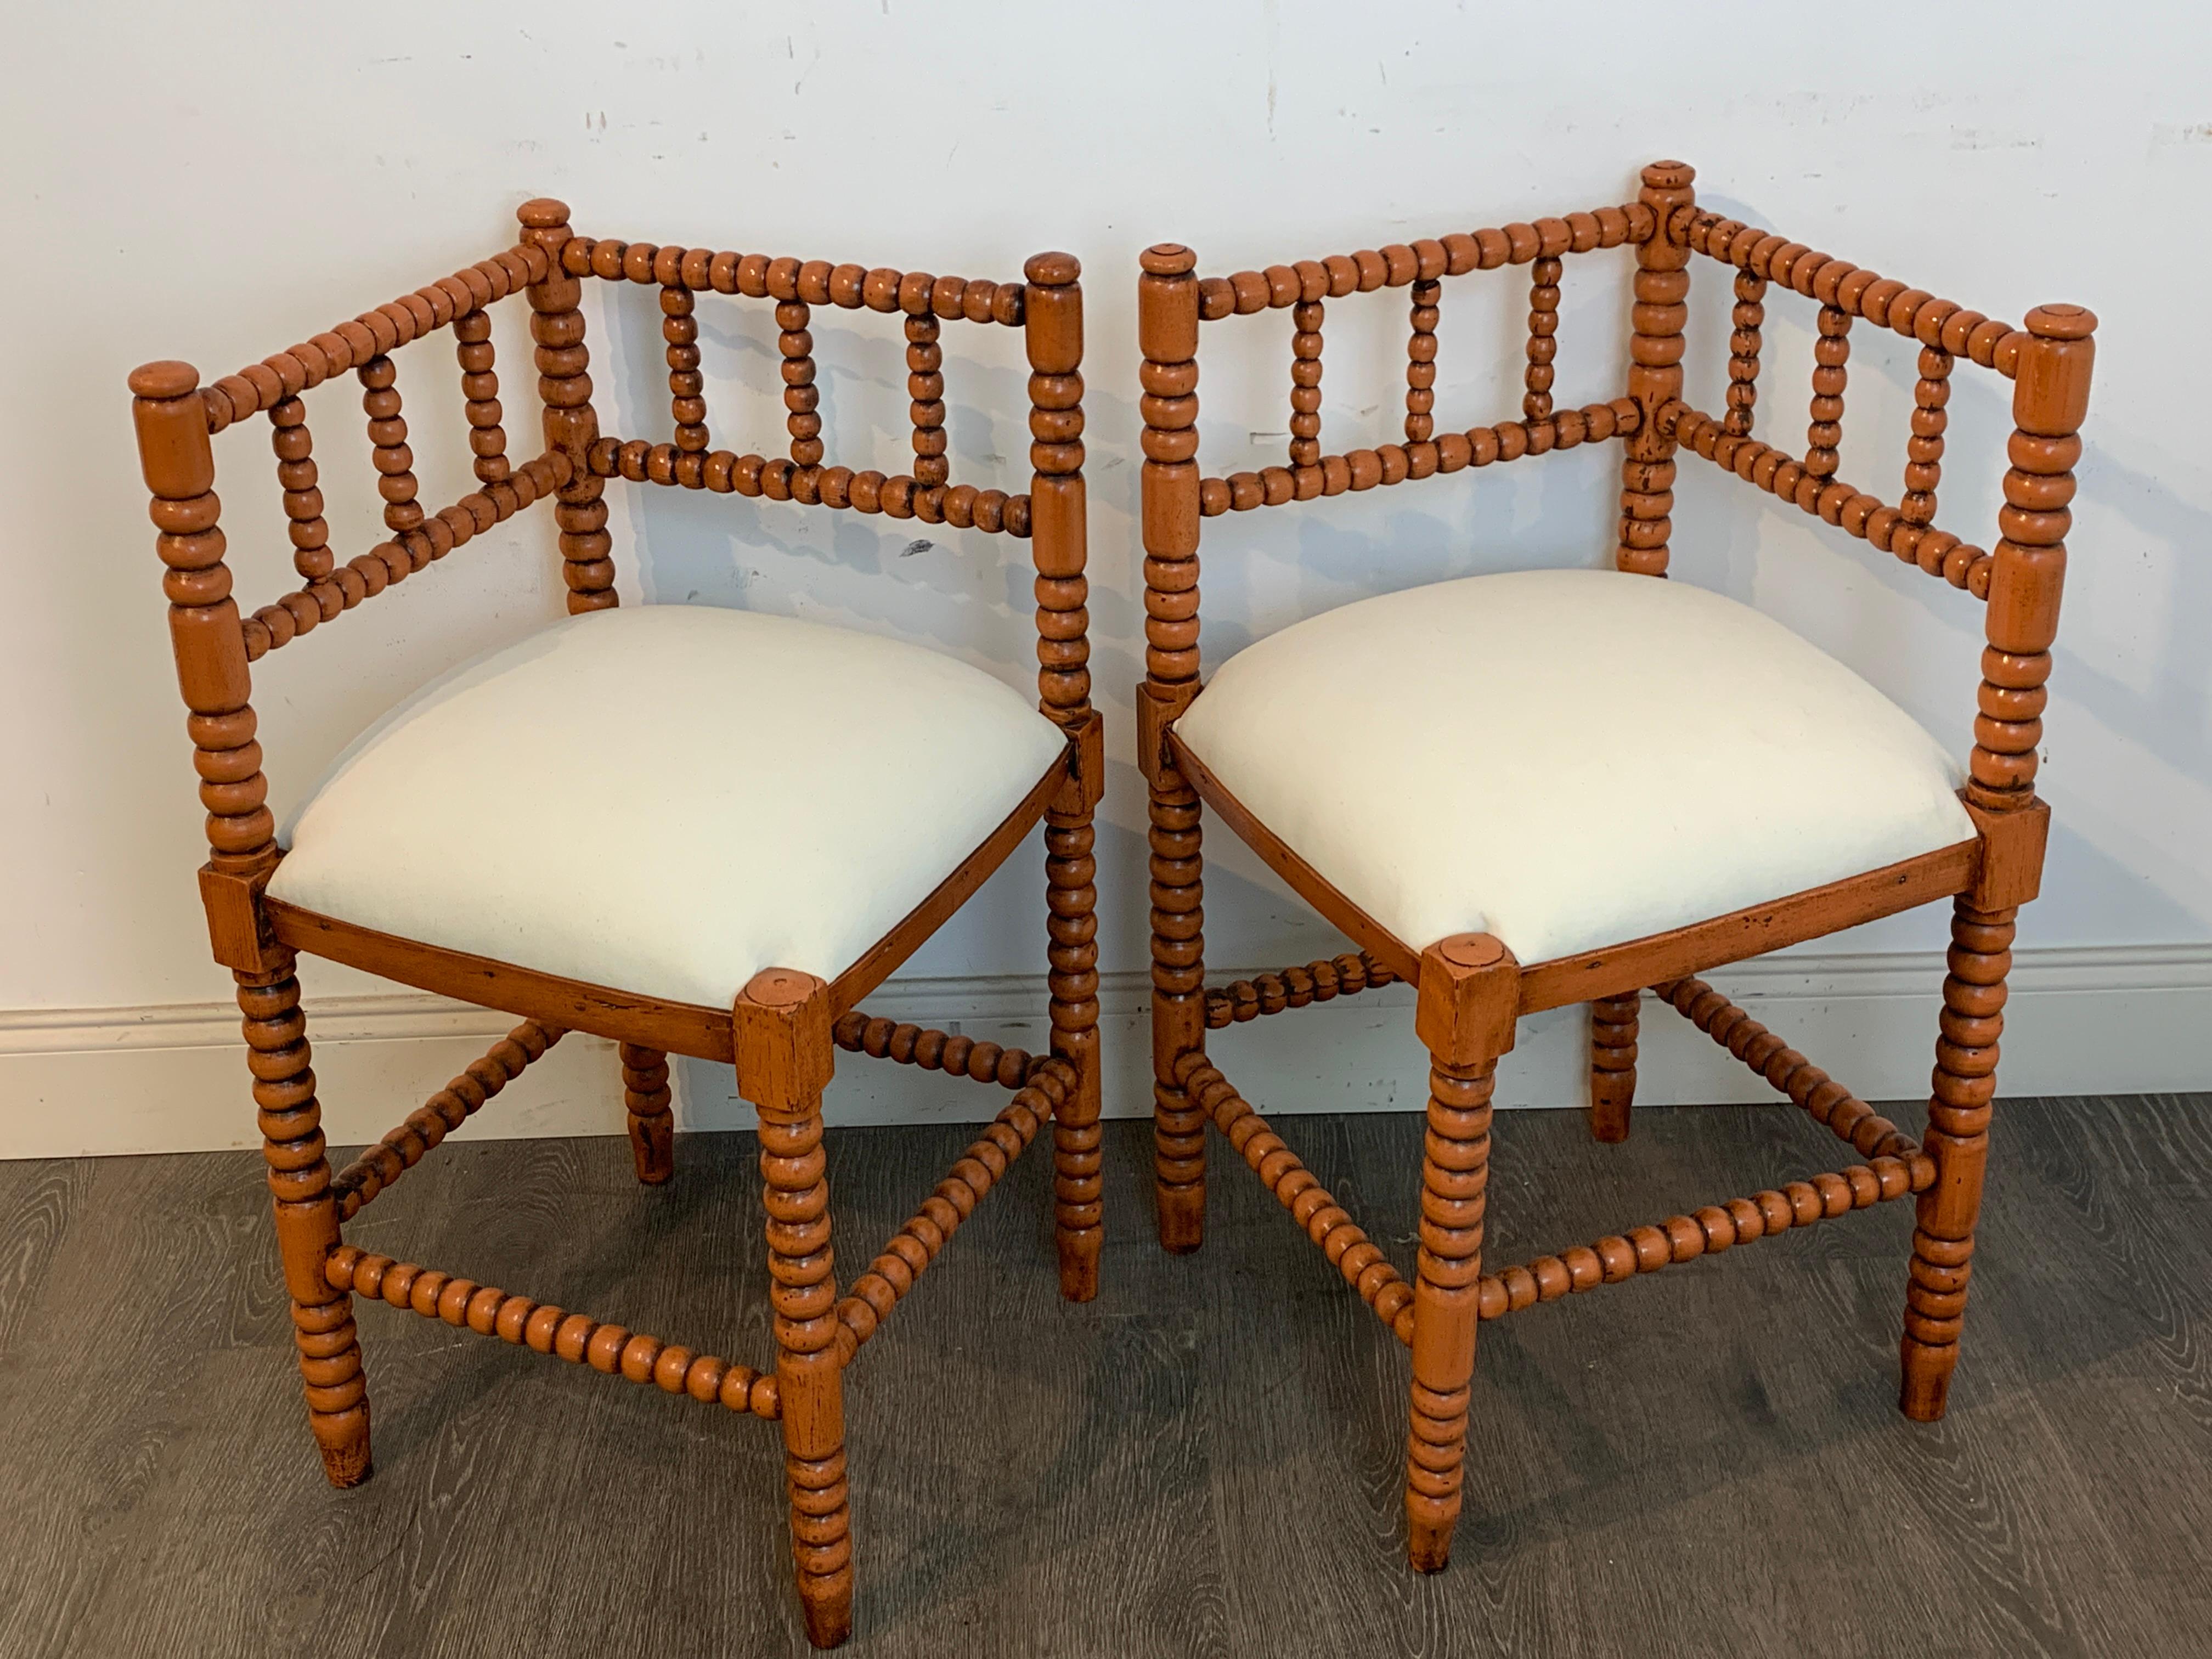 Pair of Antique French Stick and Ball Corner Chairs with Coral Polychrome

Presenting a quintessential example of French craftsmanship, this pair of antique French stick and ball corner chairs is a true antique treasure. Each piece features an